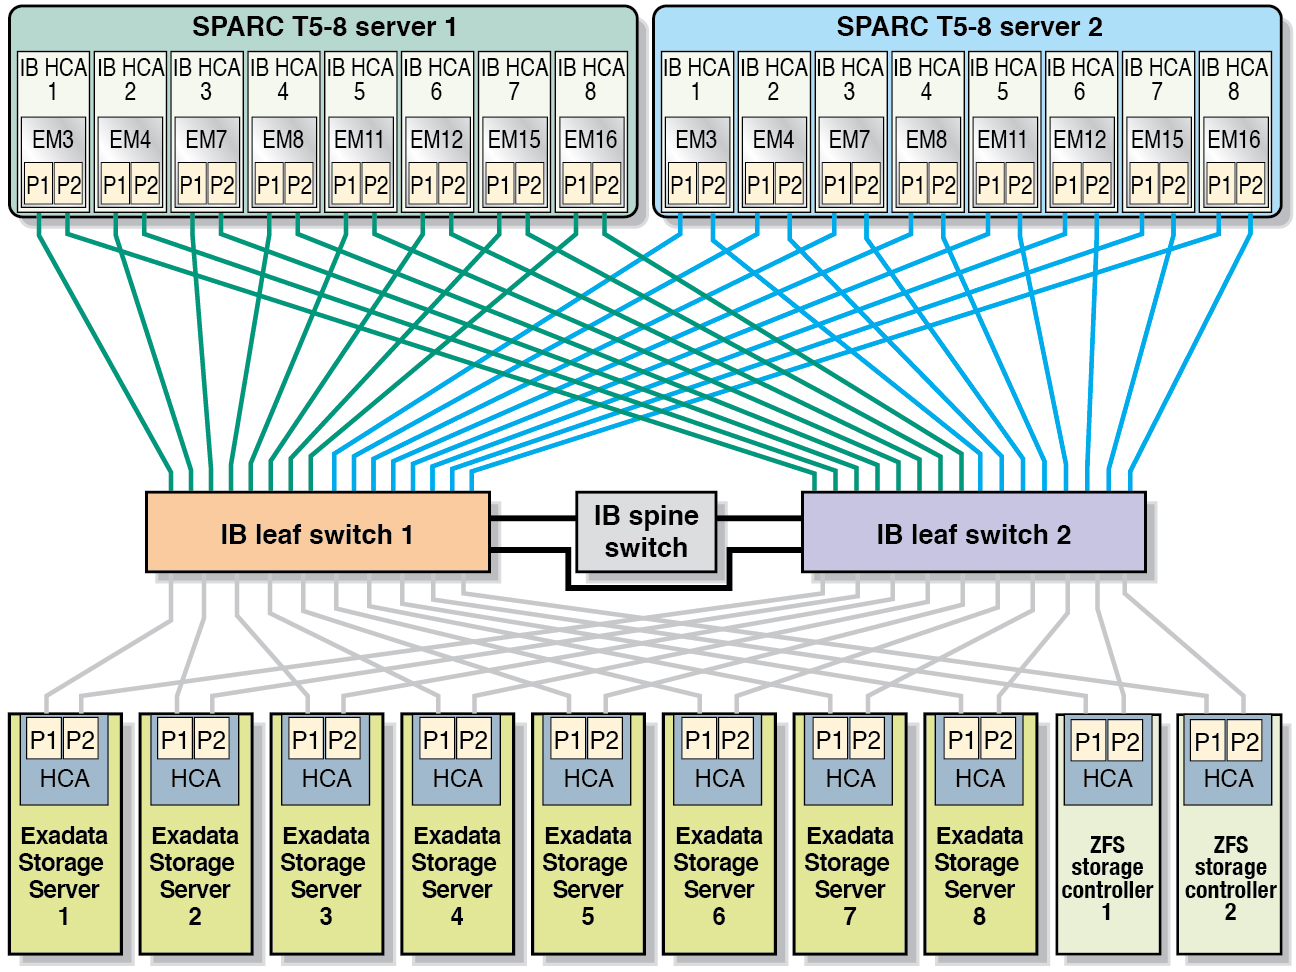 image:Graphic showing the InfiniBand connections for the SPARC T5-8 servers in a Full Rack.